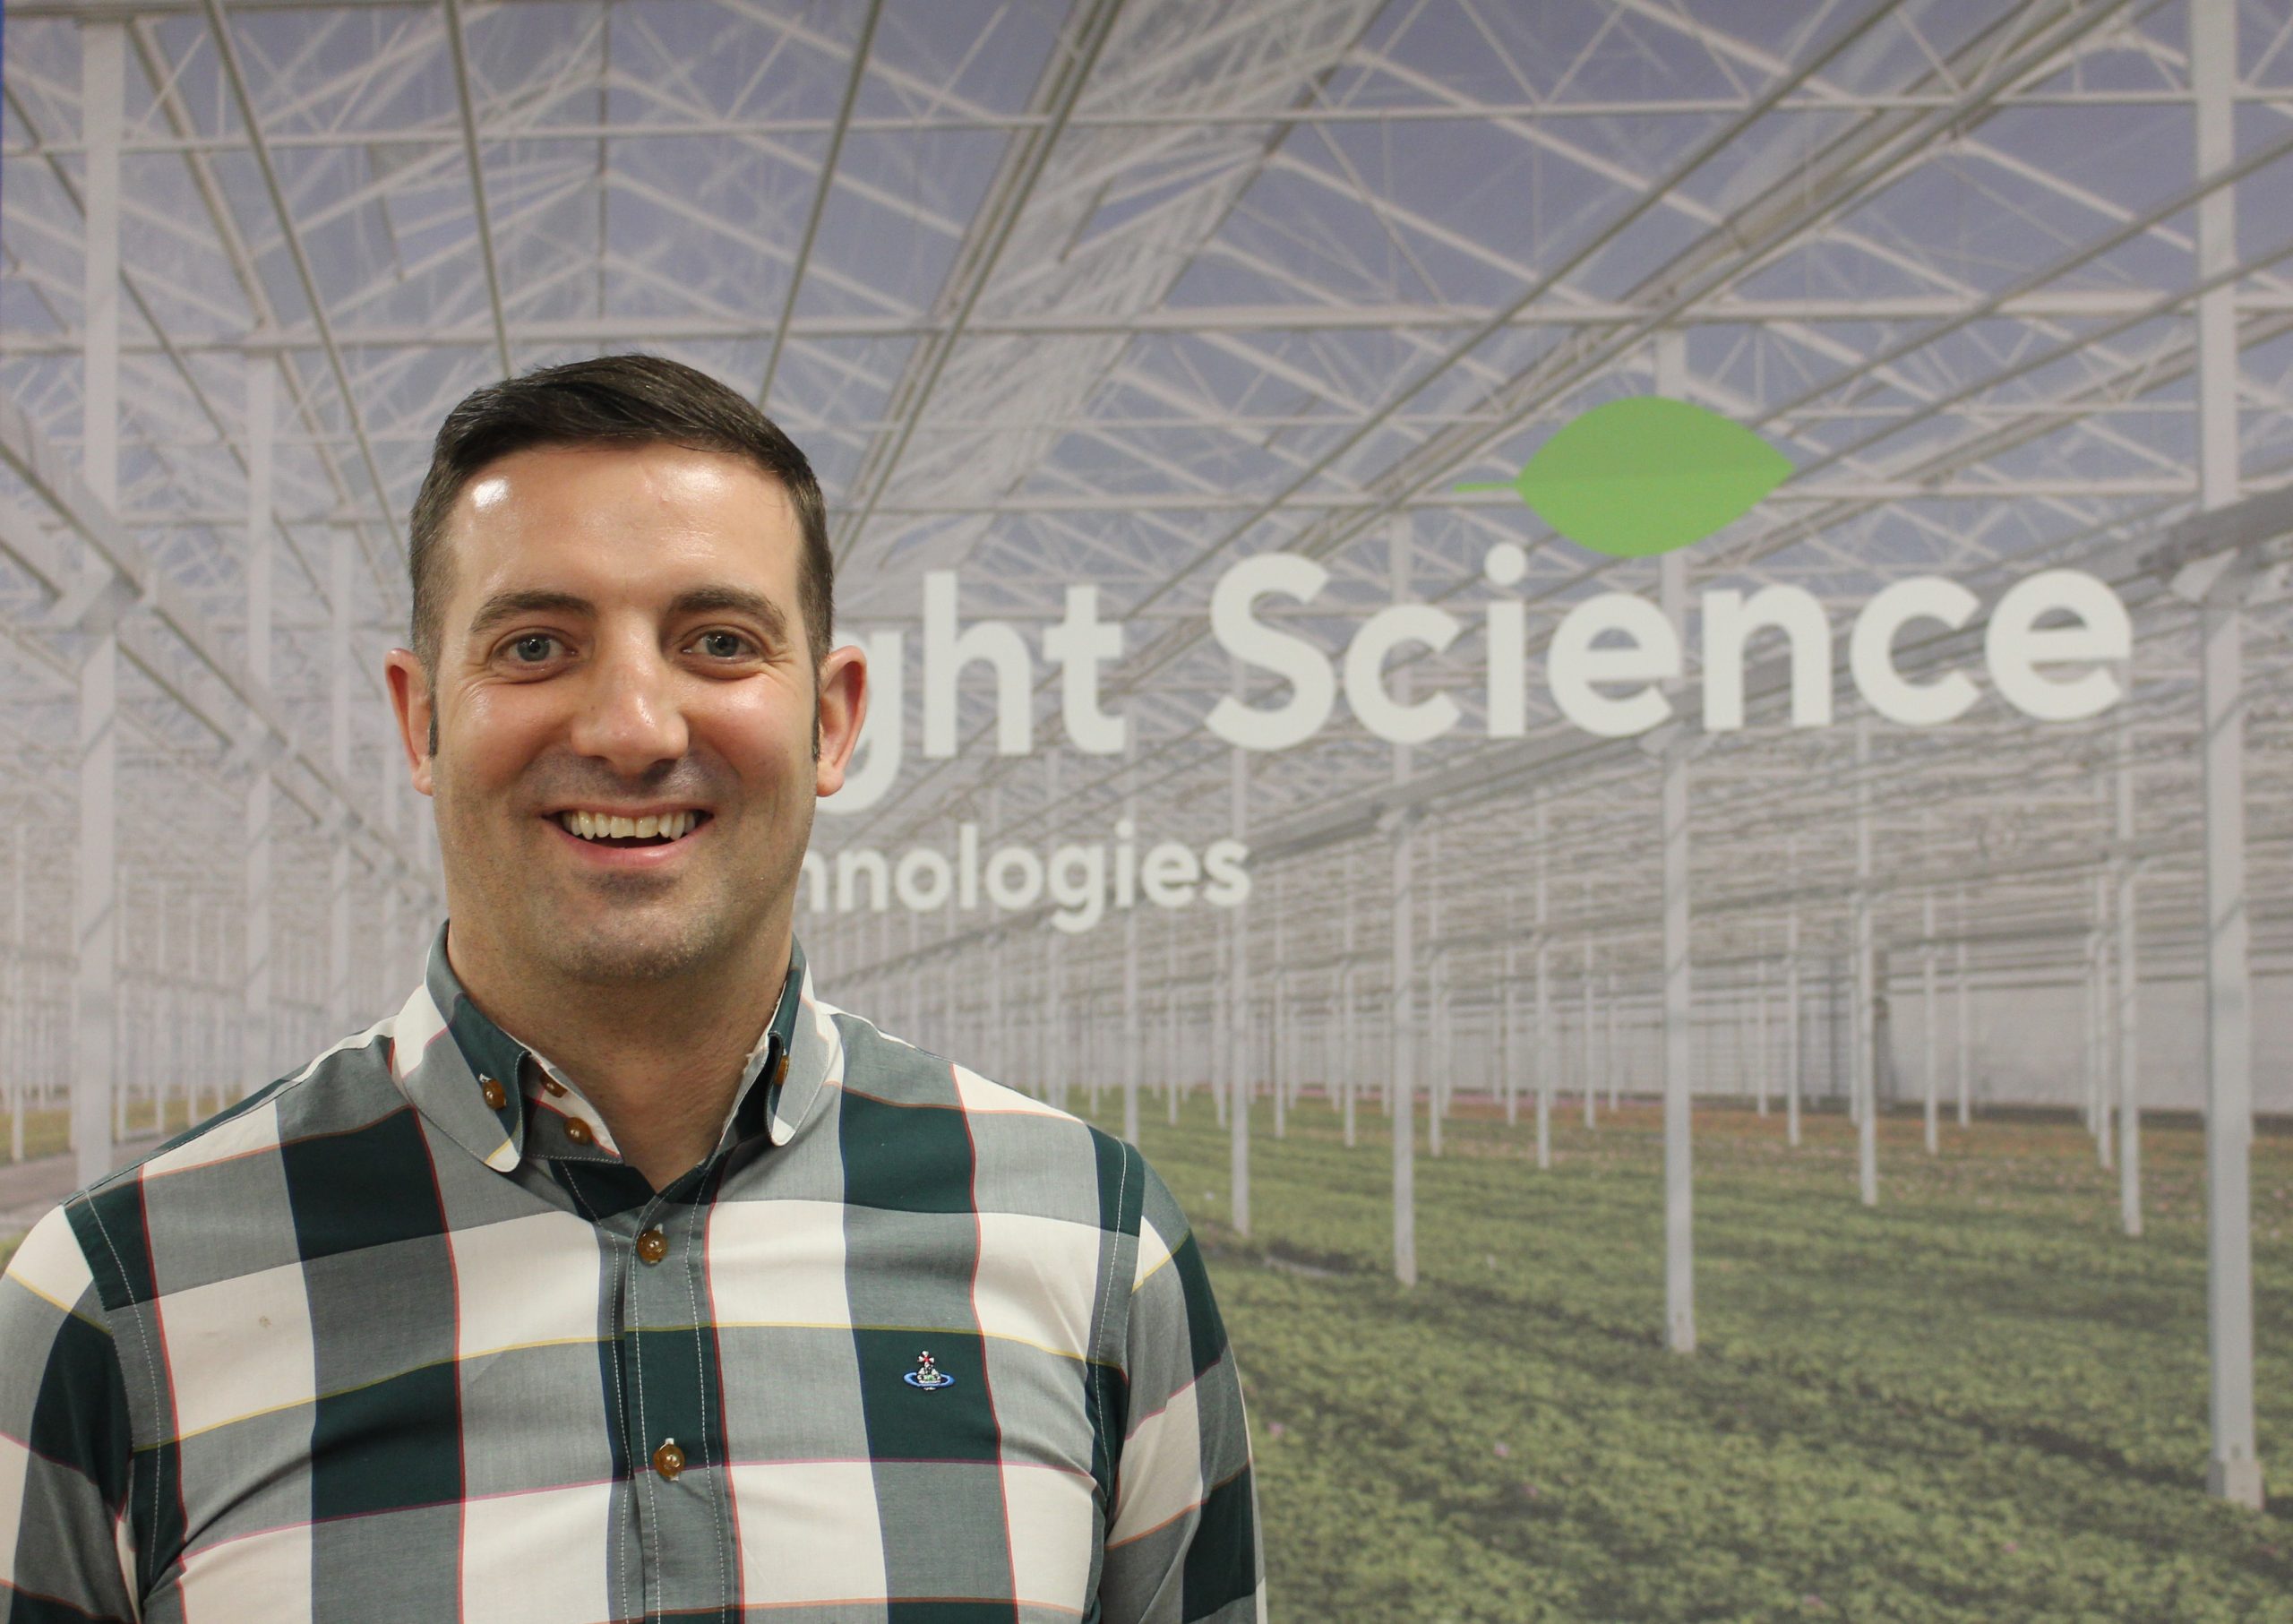 Light Science Technologies appoints new National Account Manager